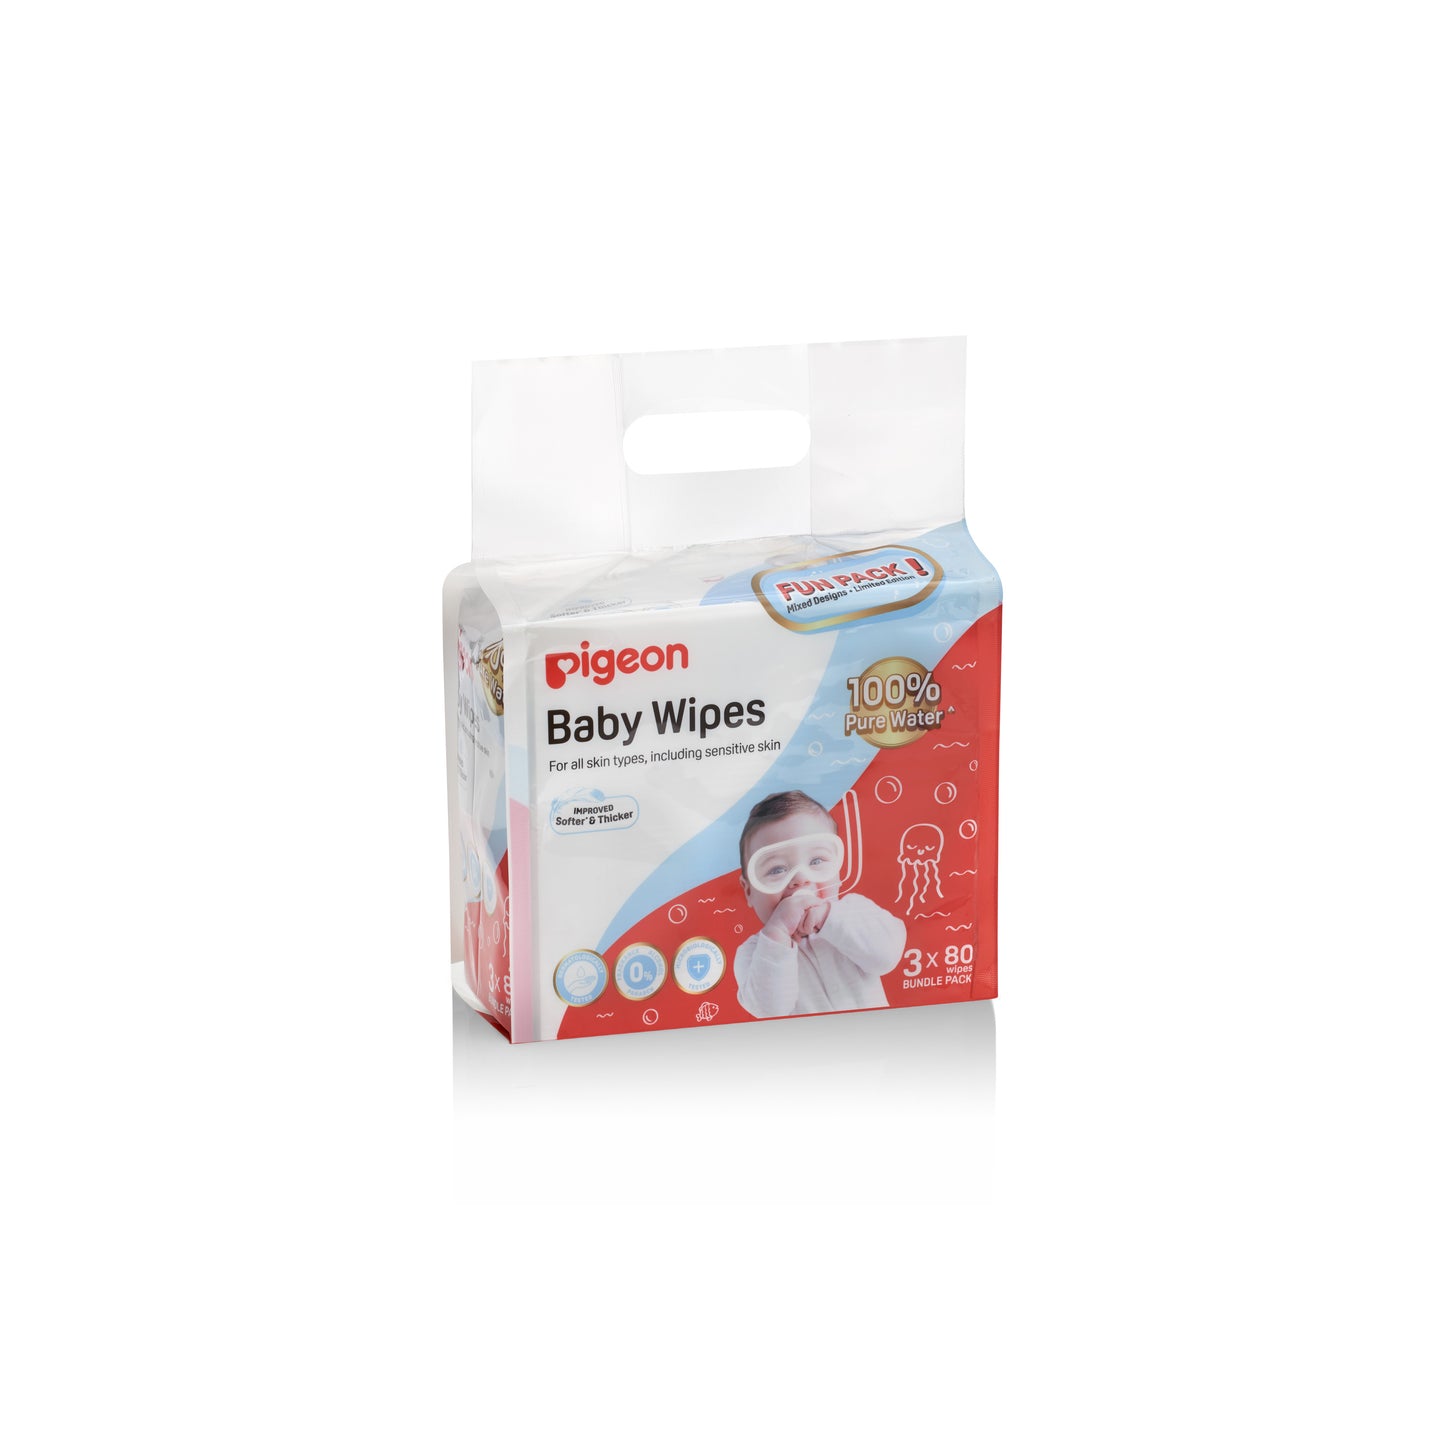 Pigeon Baby Wipes Pure Water 80s 3 in 1